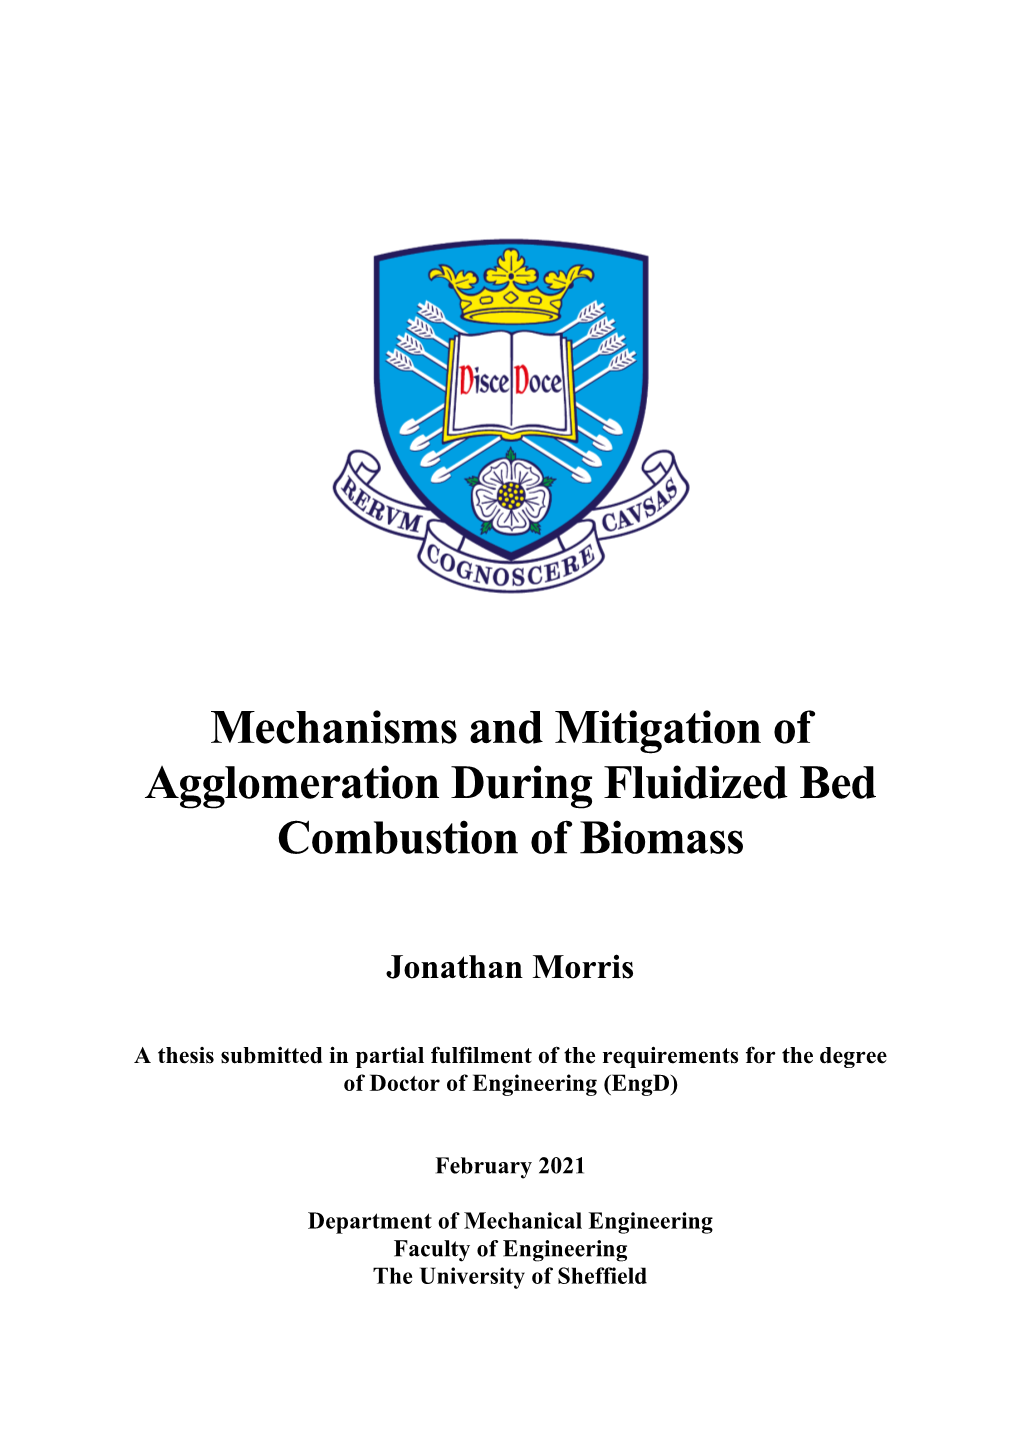 Mechanisms and Mitigation of Agglomeration During Fluidized Bed Combustion of Biomass